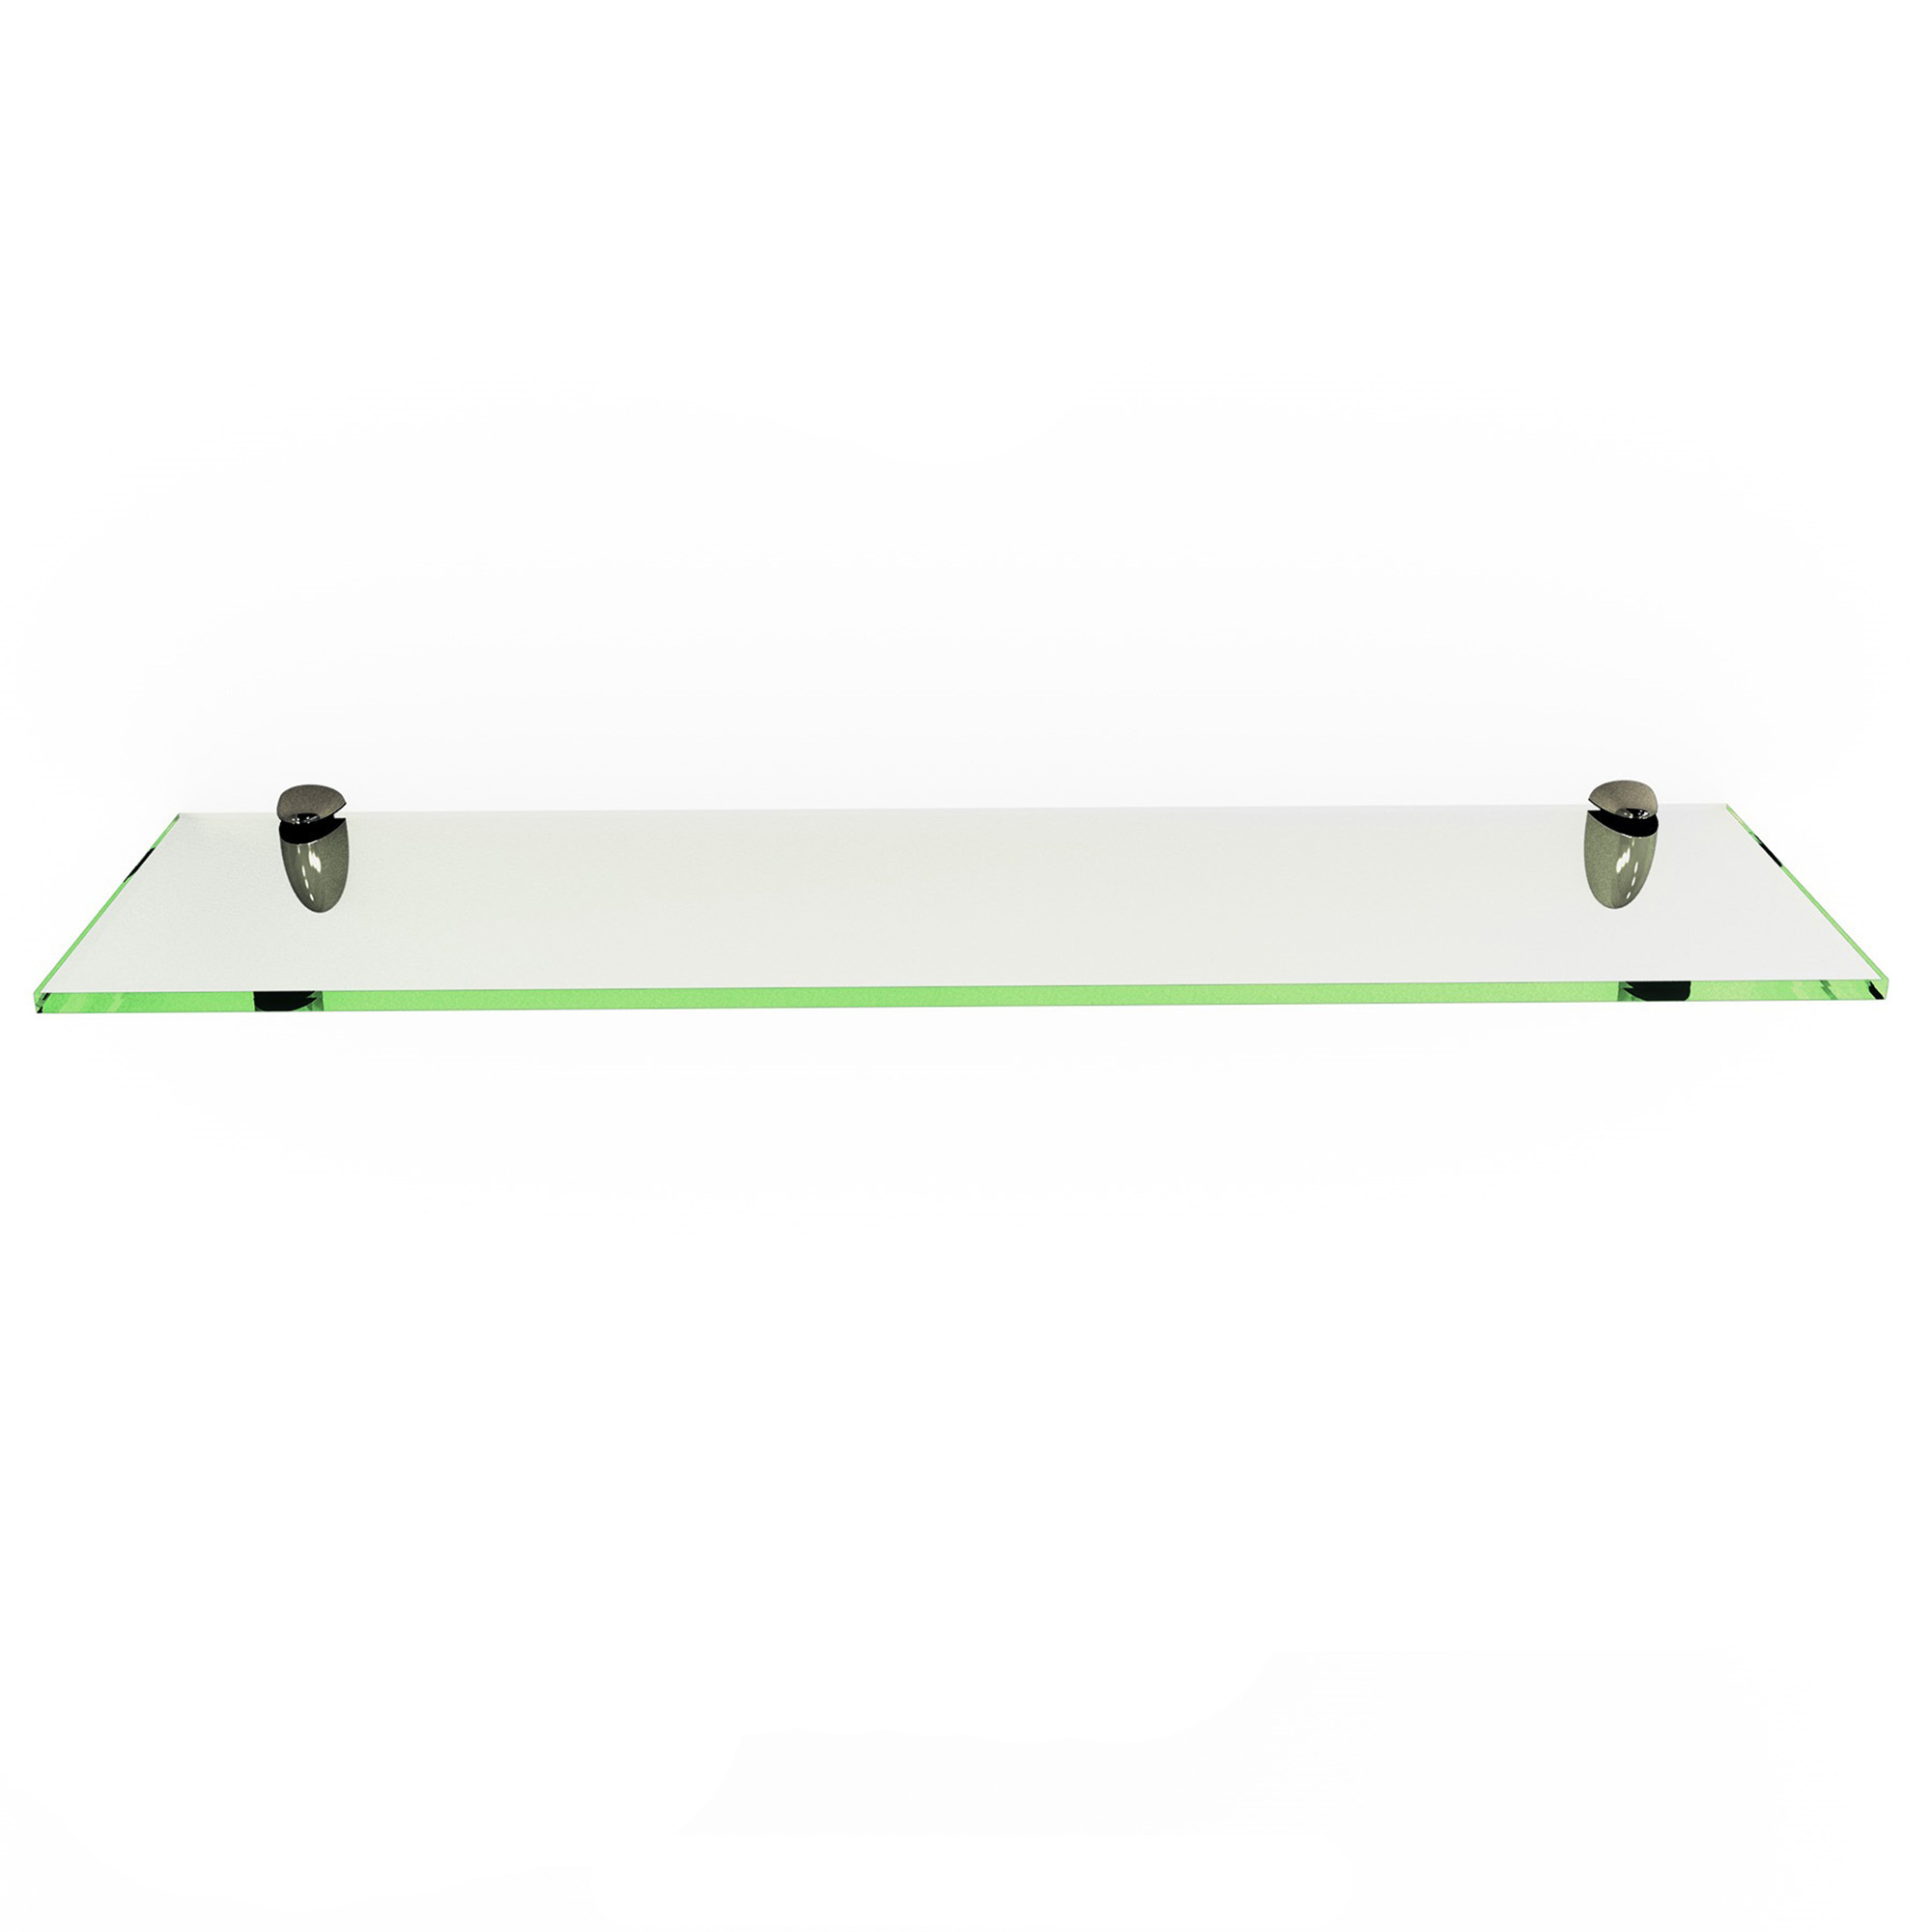 SINGLE 8MM TOUGHENED GLASS SHELF WE CAN MAKE ANY SIZE UP TO 1000mm x 400mm